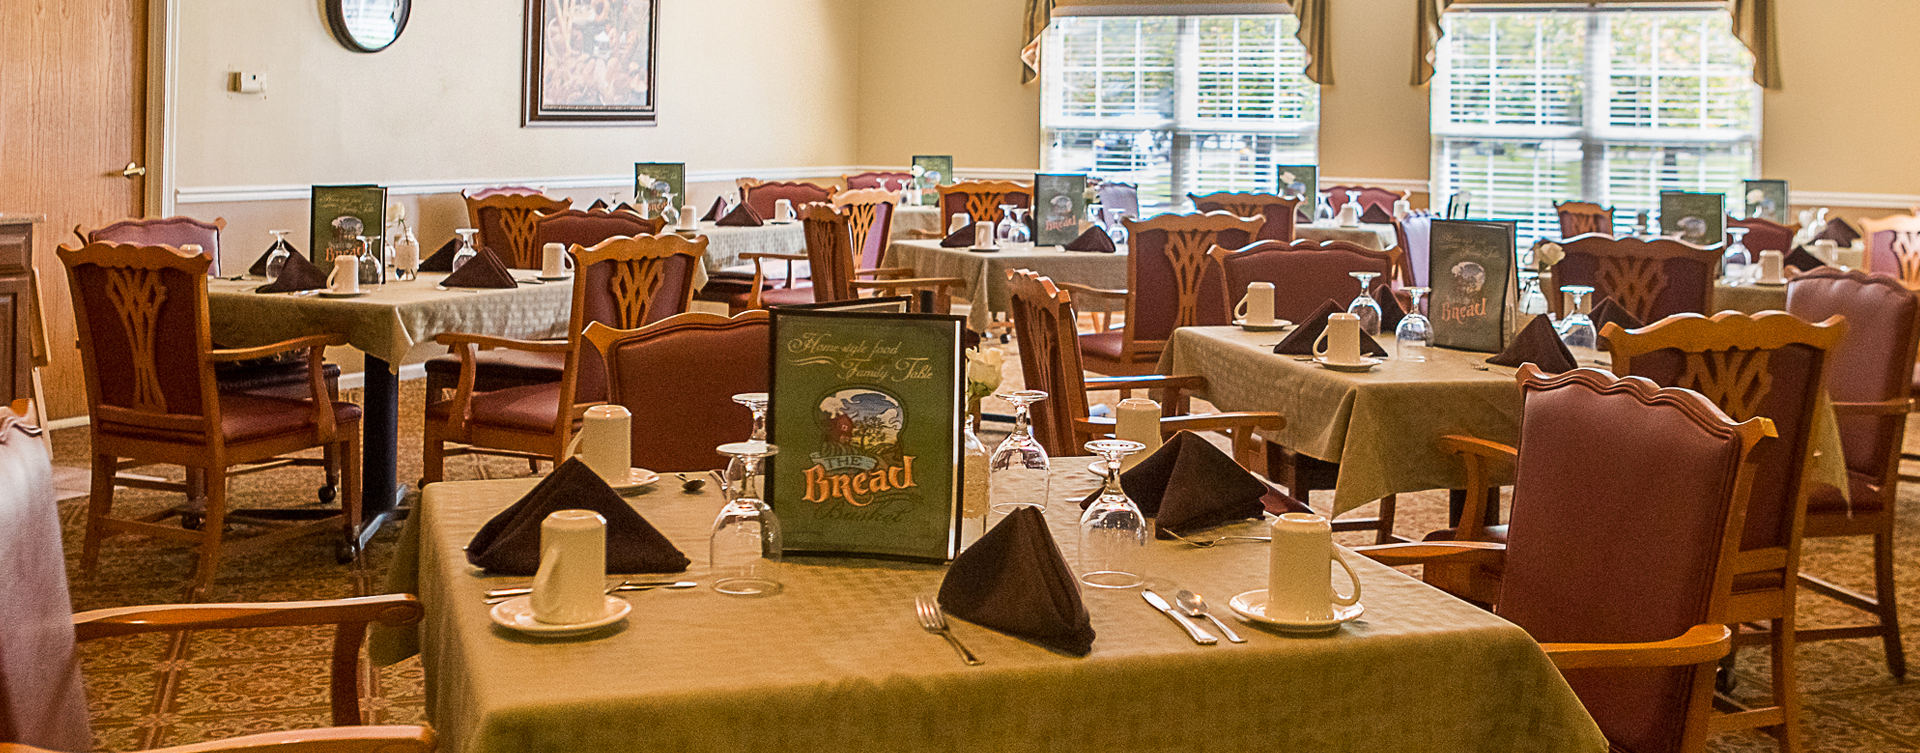 Enjoy homestyle food with made-from-scratch recipes in our dining room at Bickford of Muscatine